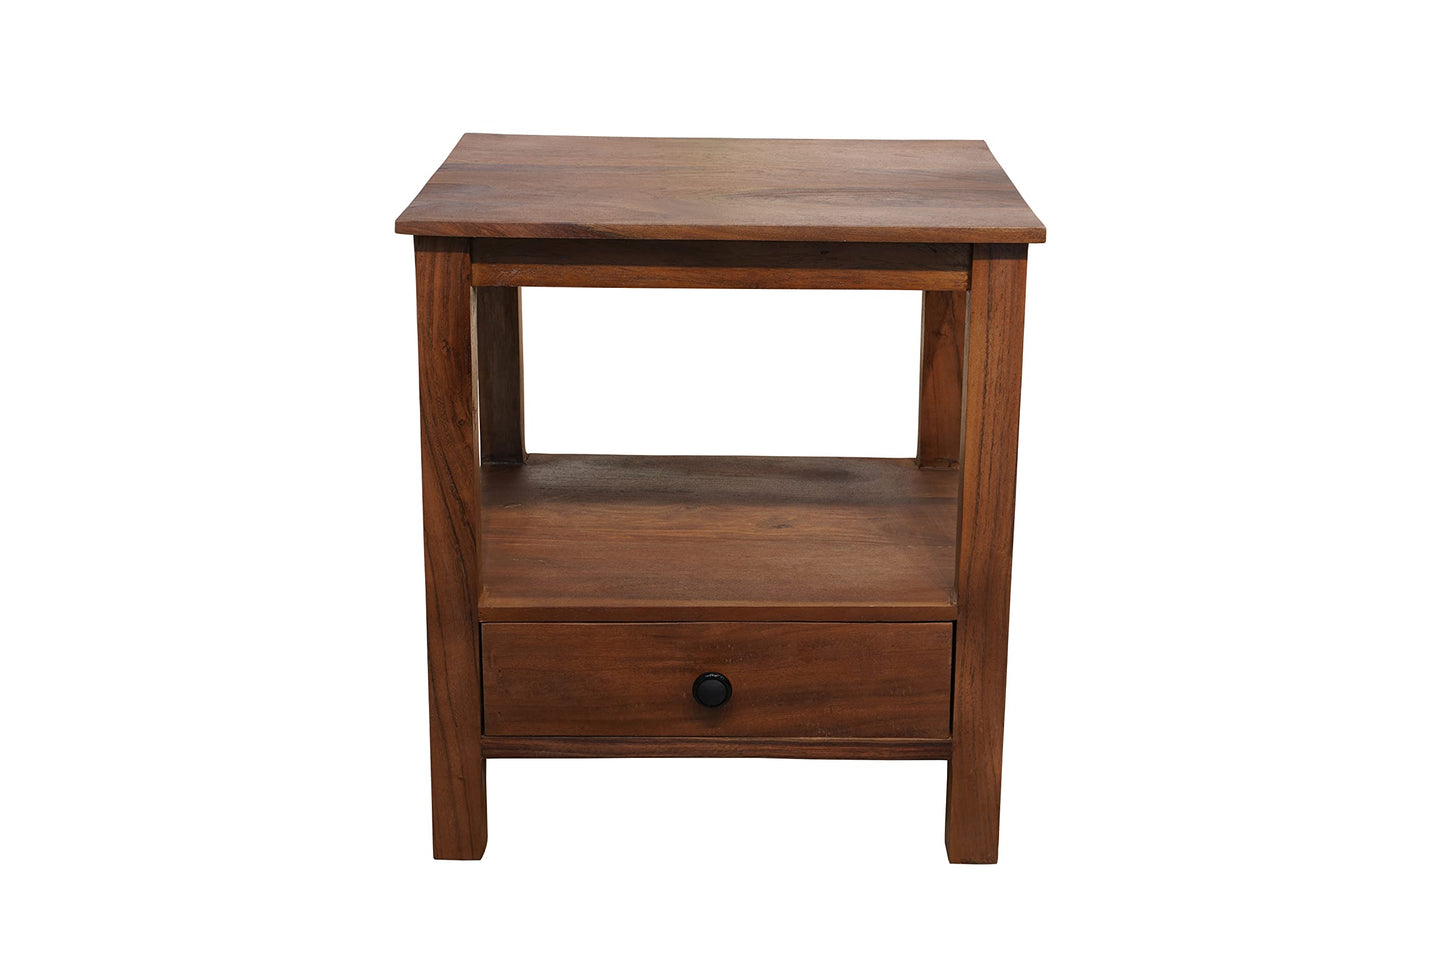 USHA SHRIRAM Wooden Side Table with Storage Honey Finish  Bed Side Table  Coffee Table  Durable  Sturdy Sheesham Wood  Side Table for Living Room 50x46x53 cm